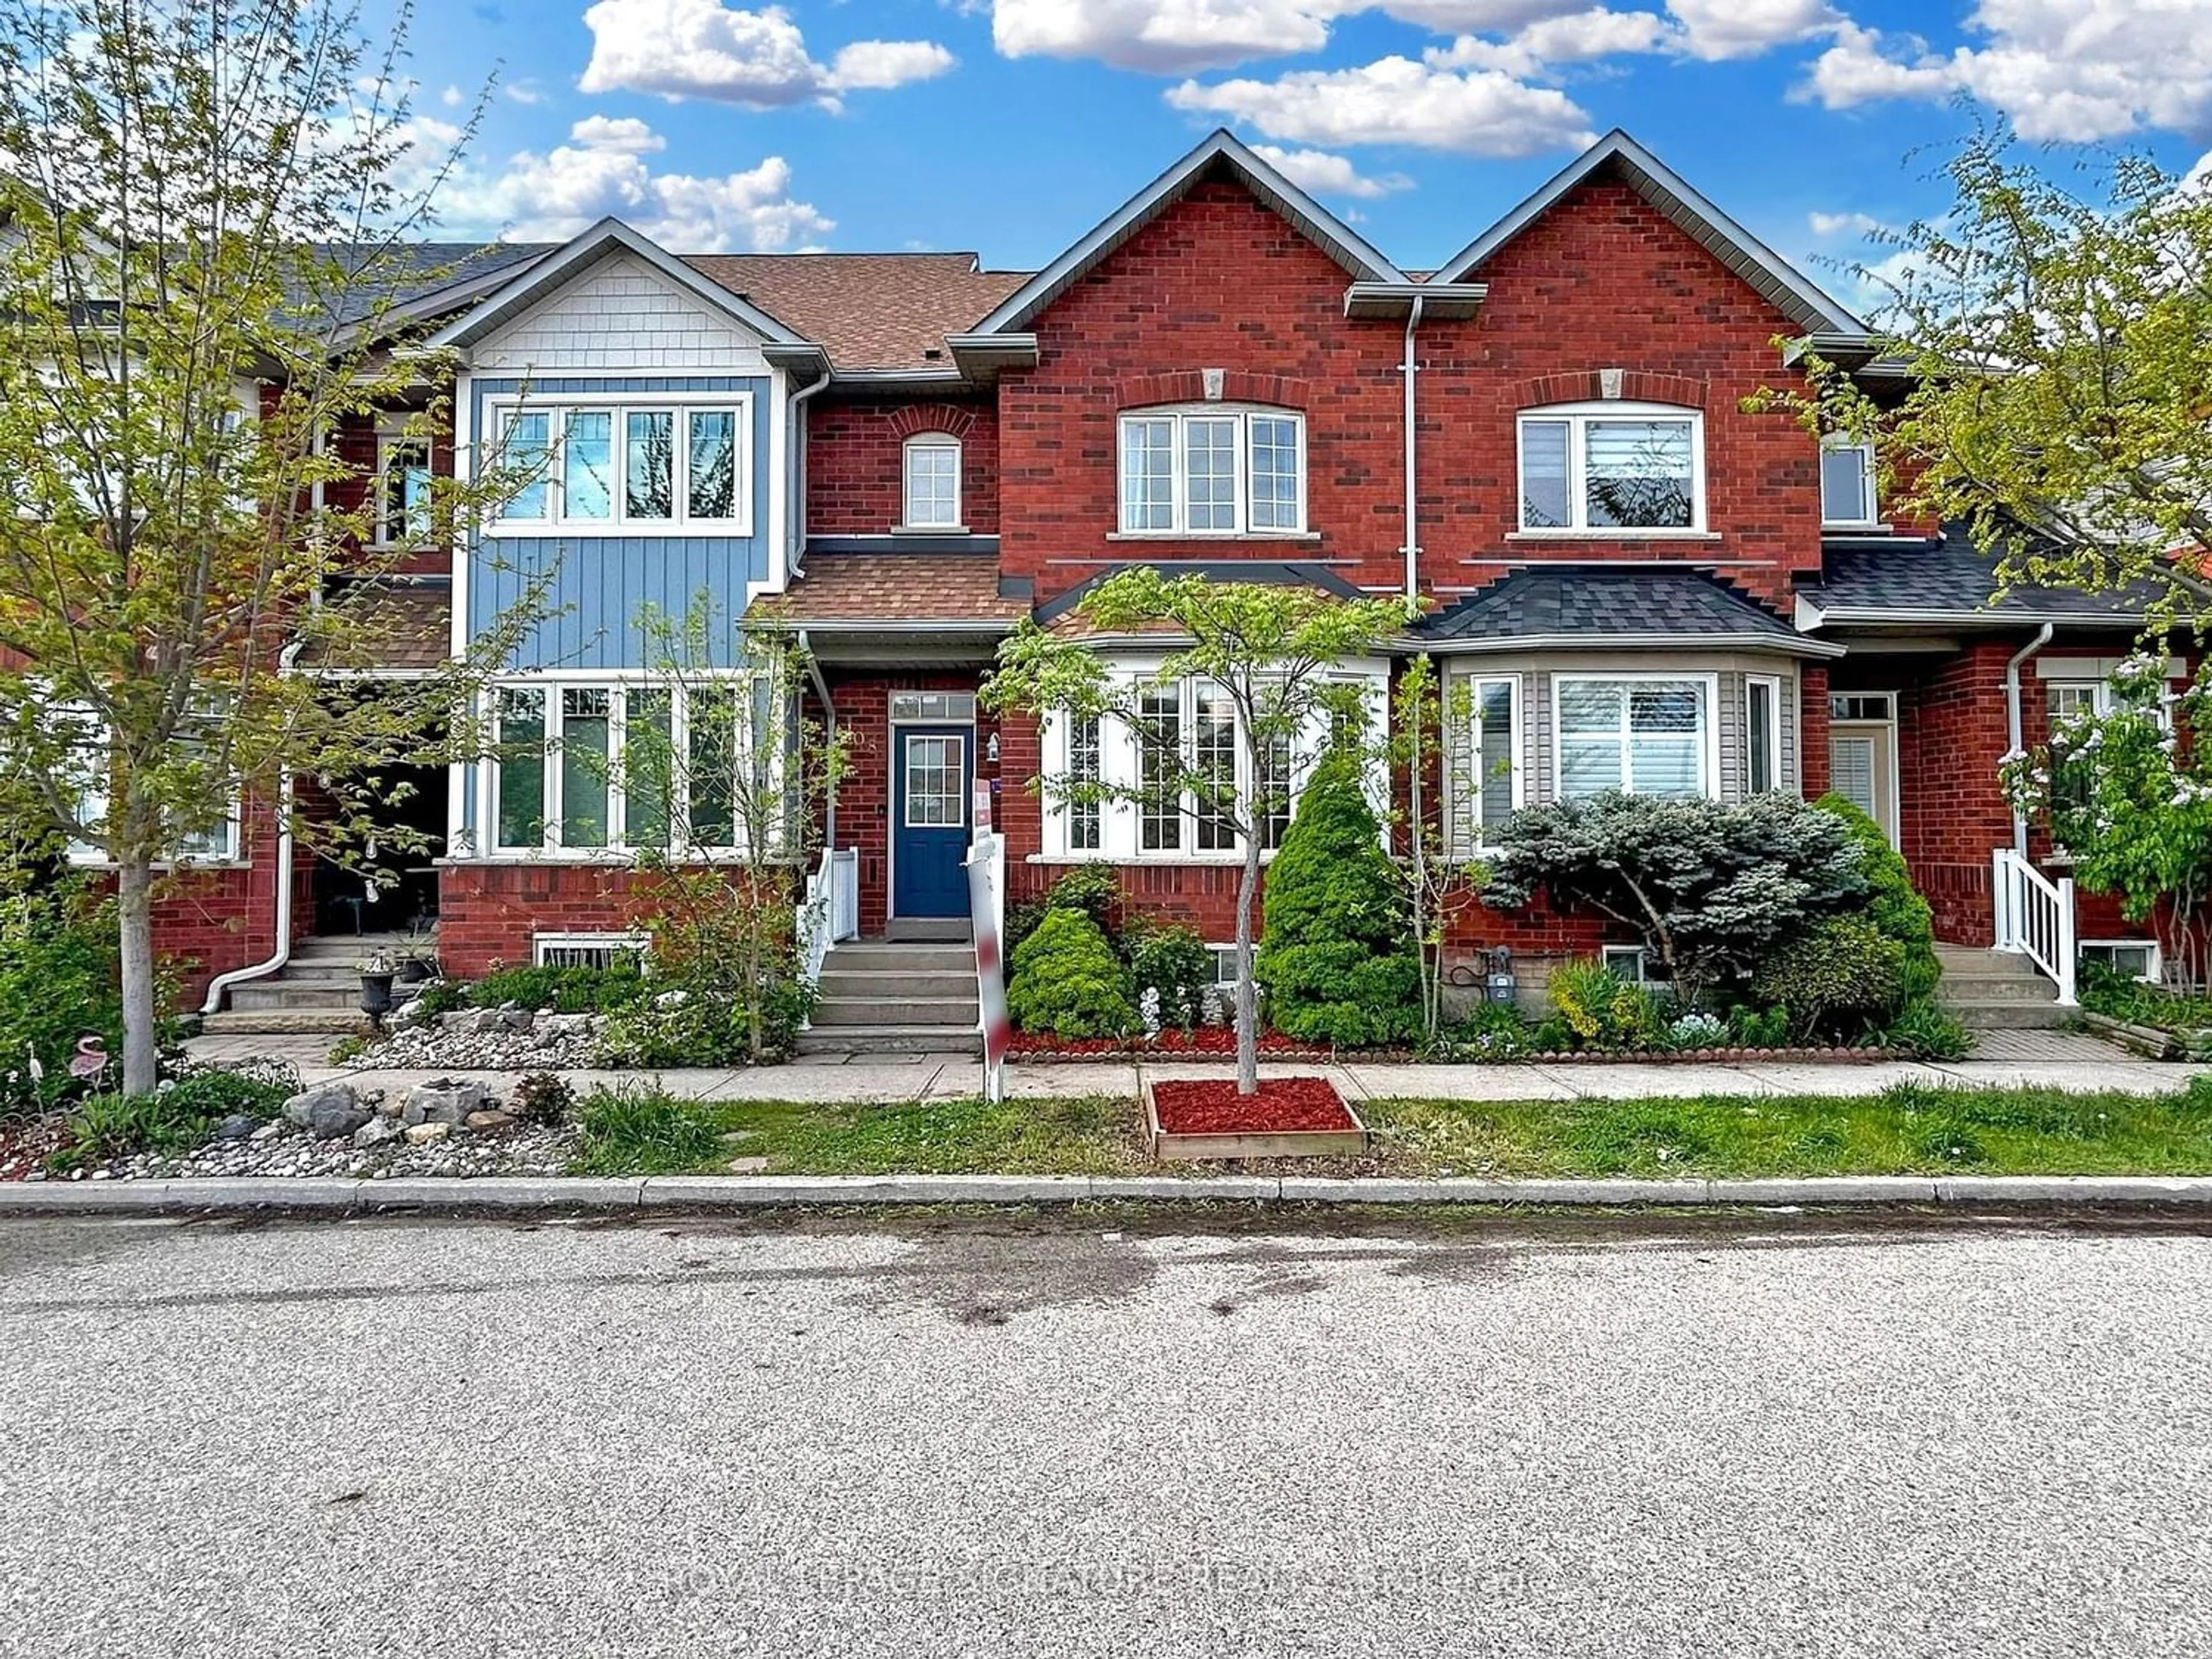 Home with brick exterior material for 108 Riverlands Ave, Markham Ontario L6B 1B6